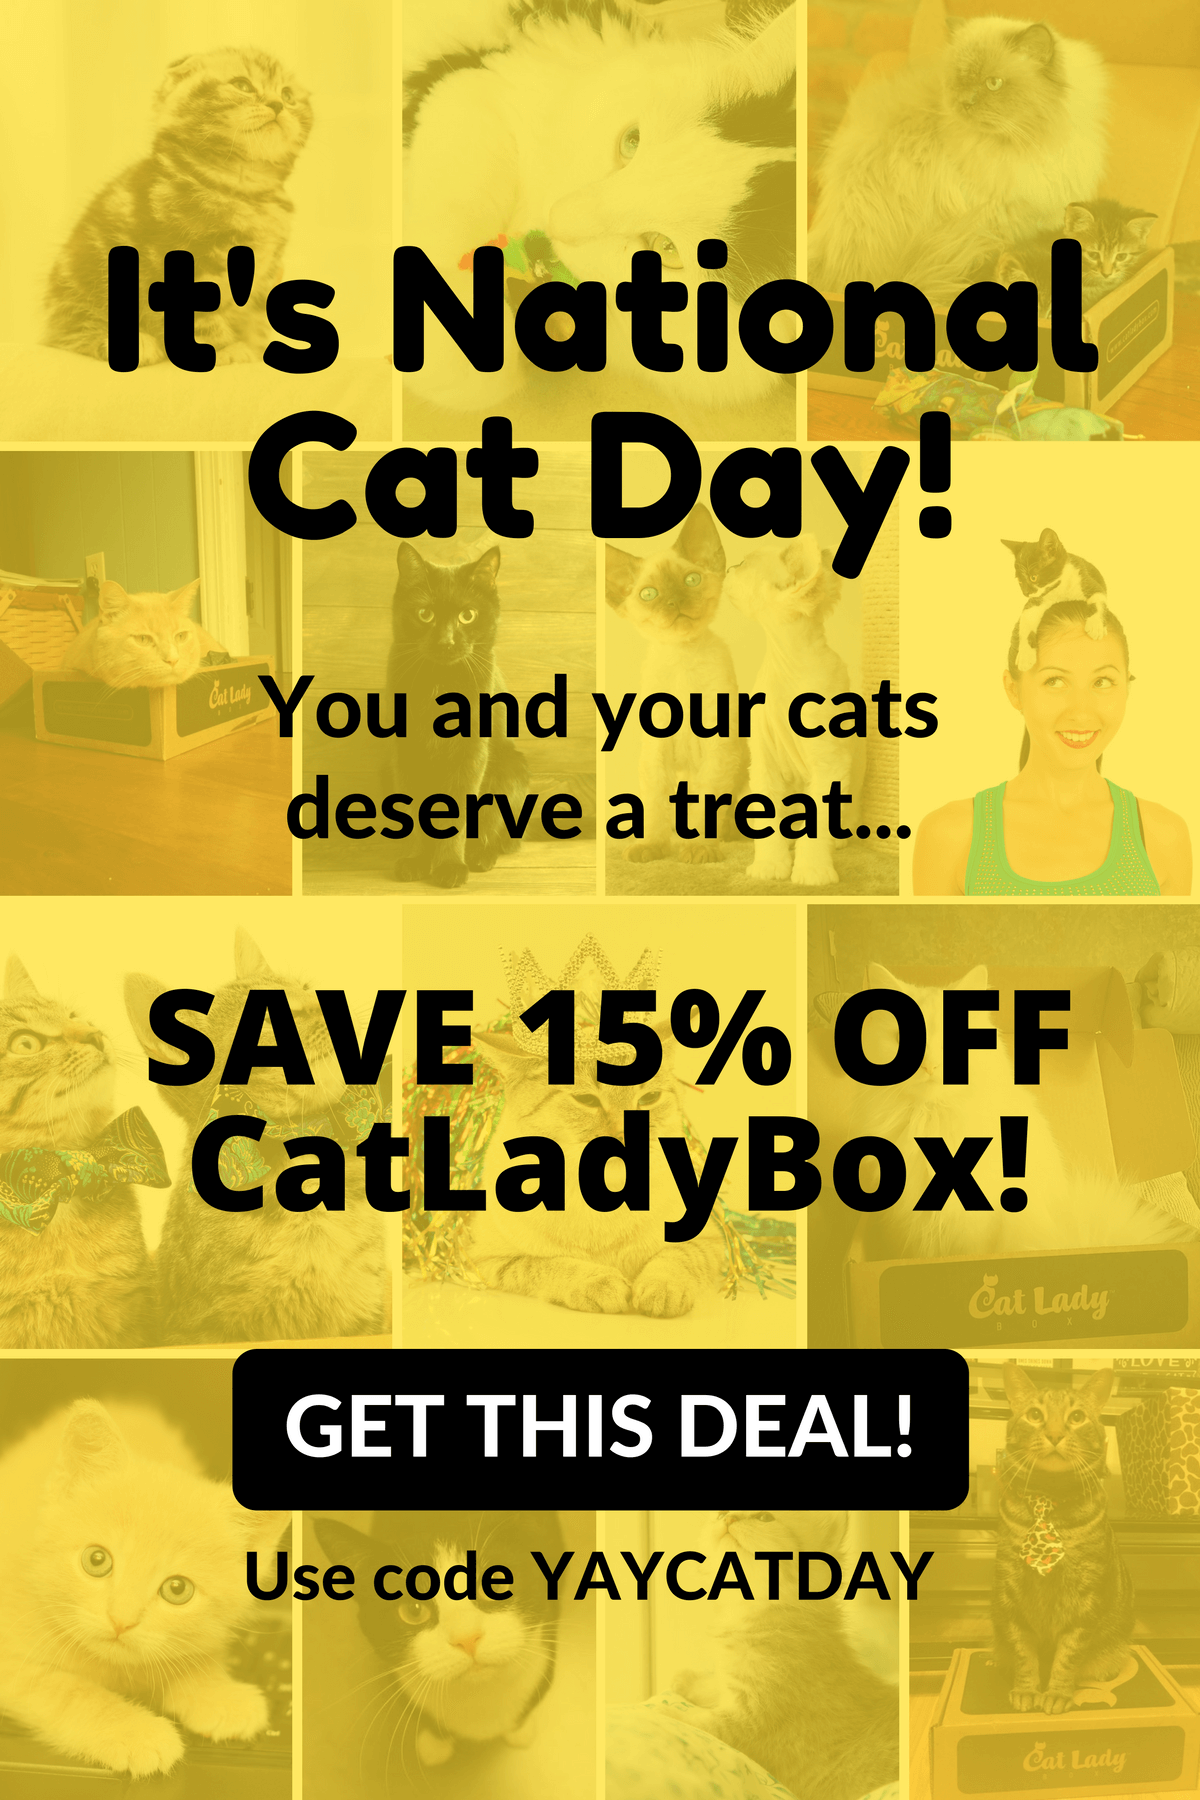 Cat Lady Box Coupon Save 15 for Cat Day! Hello Subscription